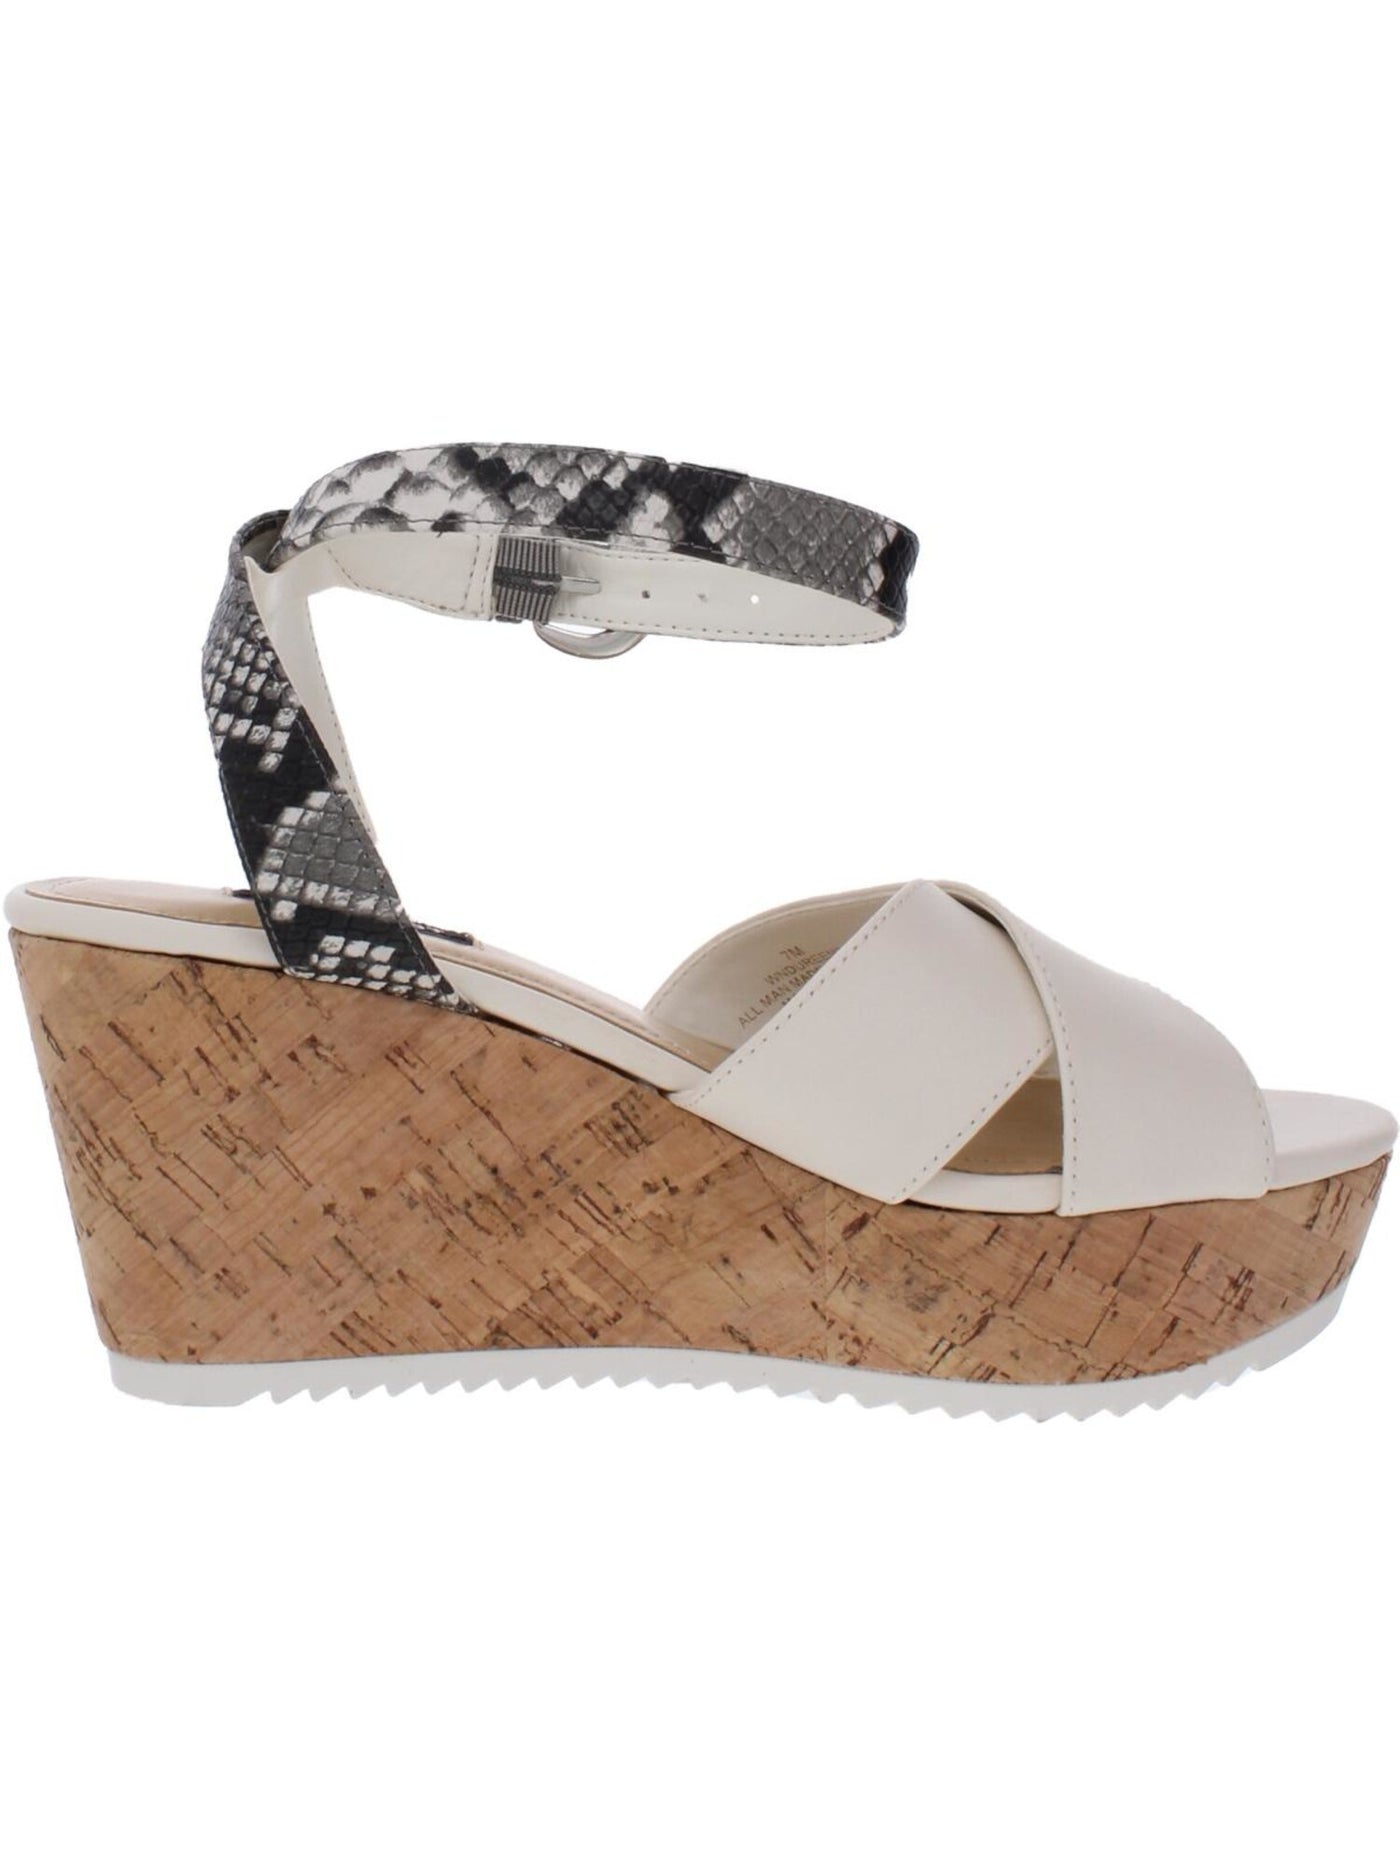 NINE WEST Womens White Snake 1.5 Platform Strappy Ankle Strap Dureen Round Toe Wedge Buckle Sandals Shoes 8.5 M